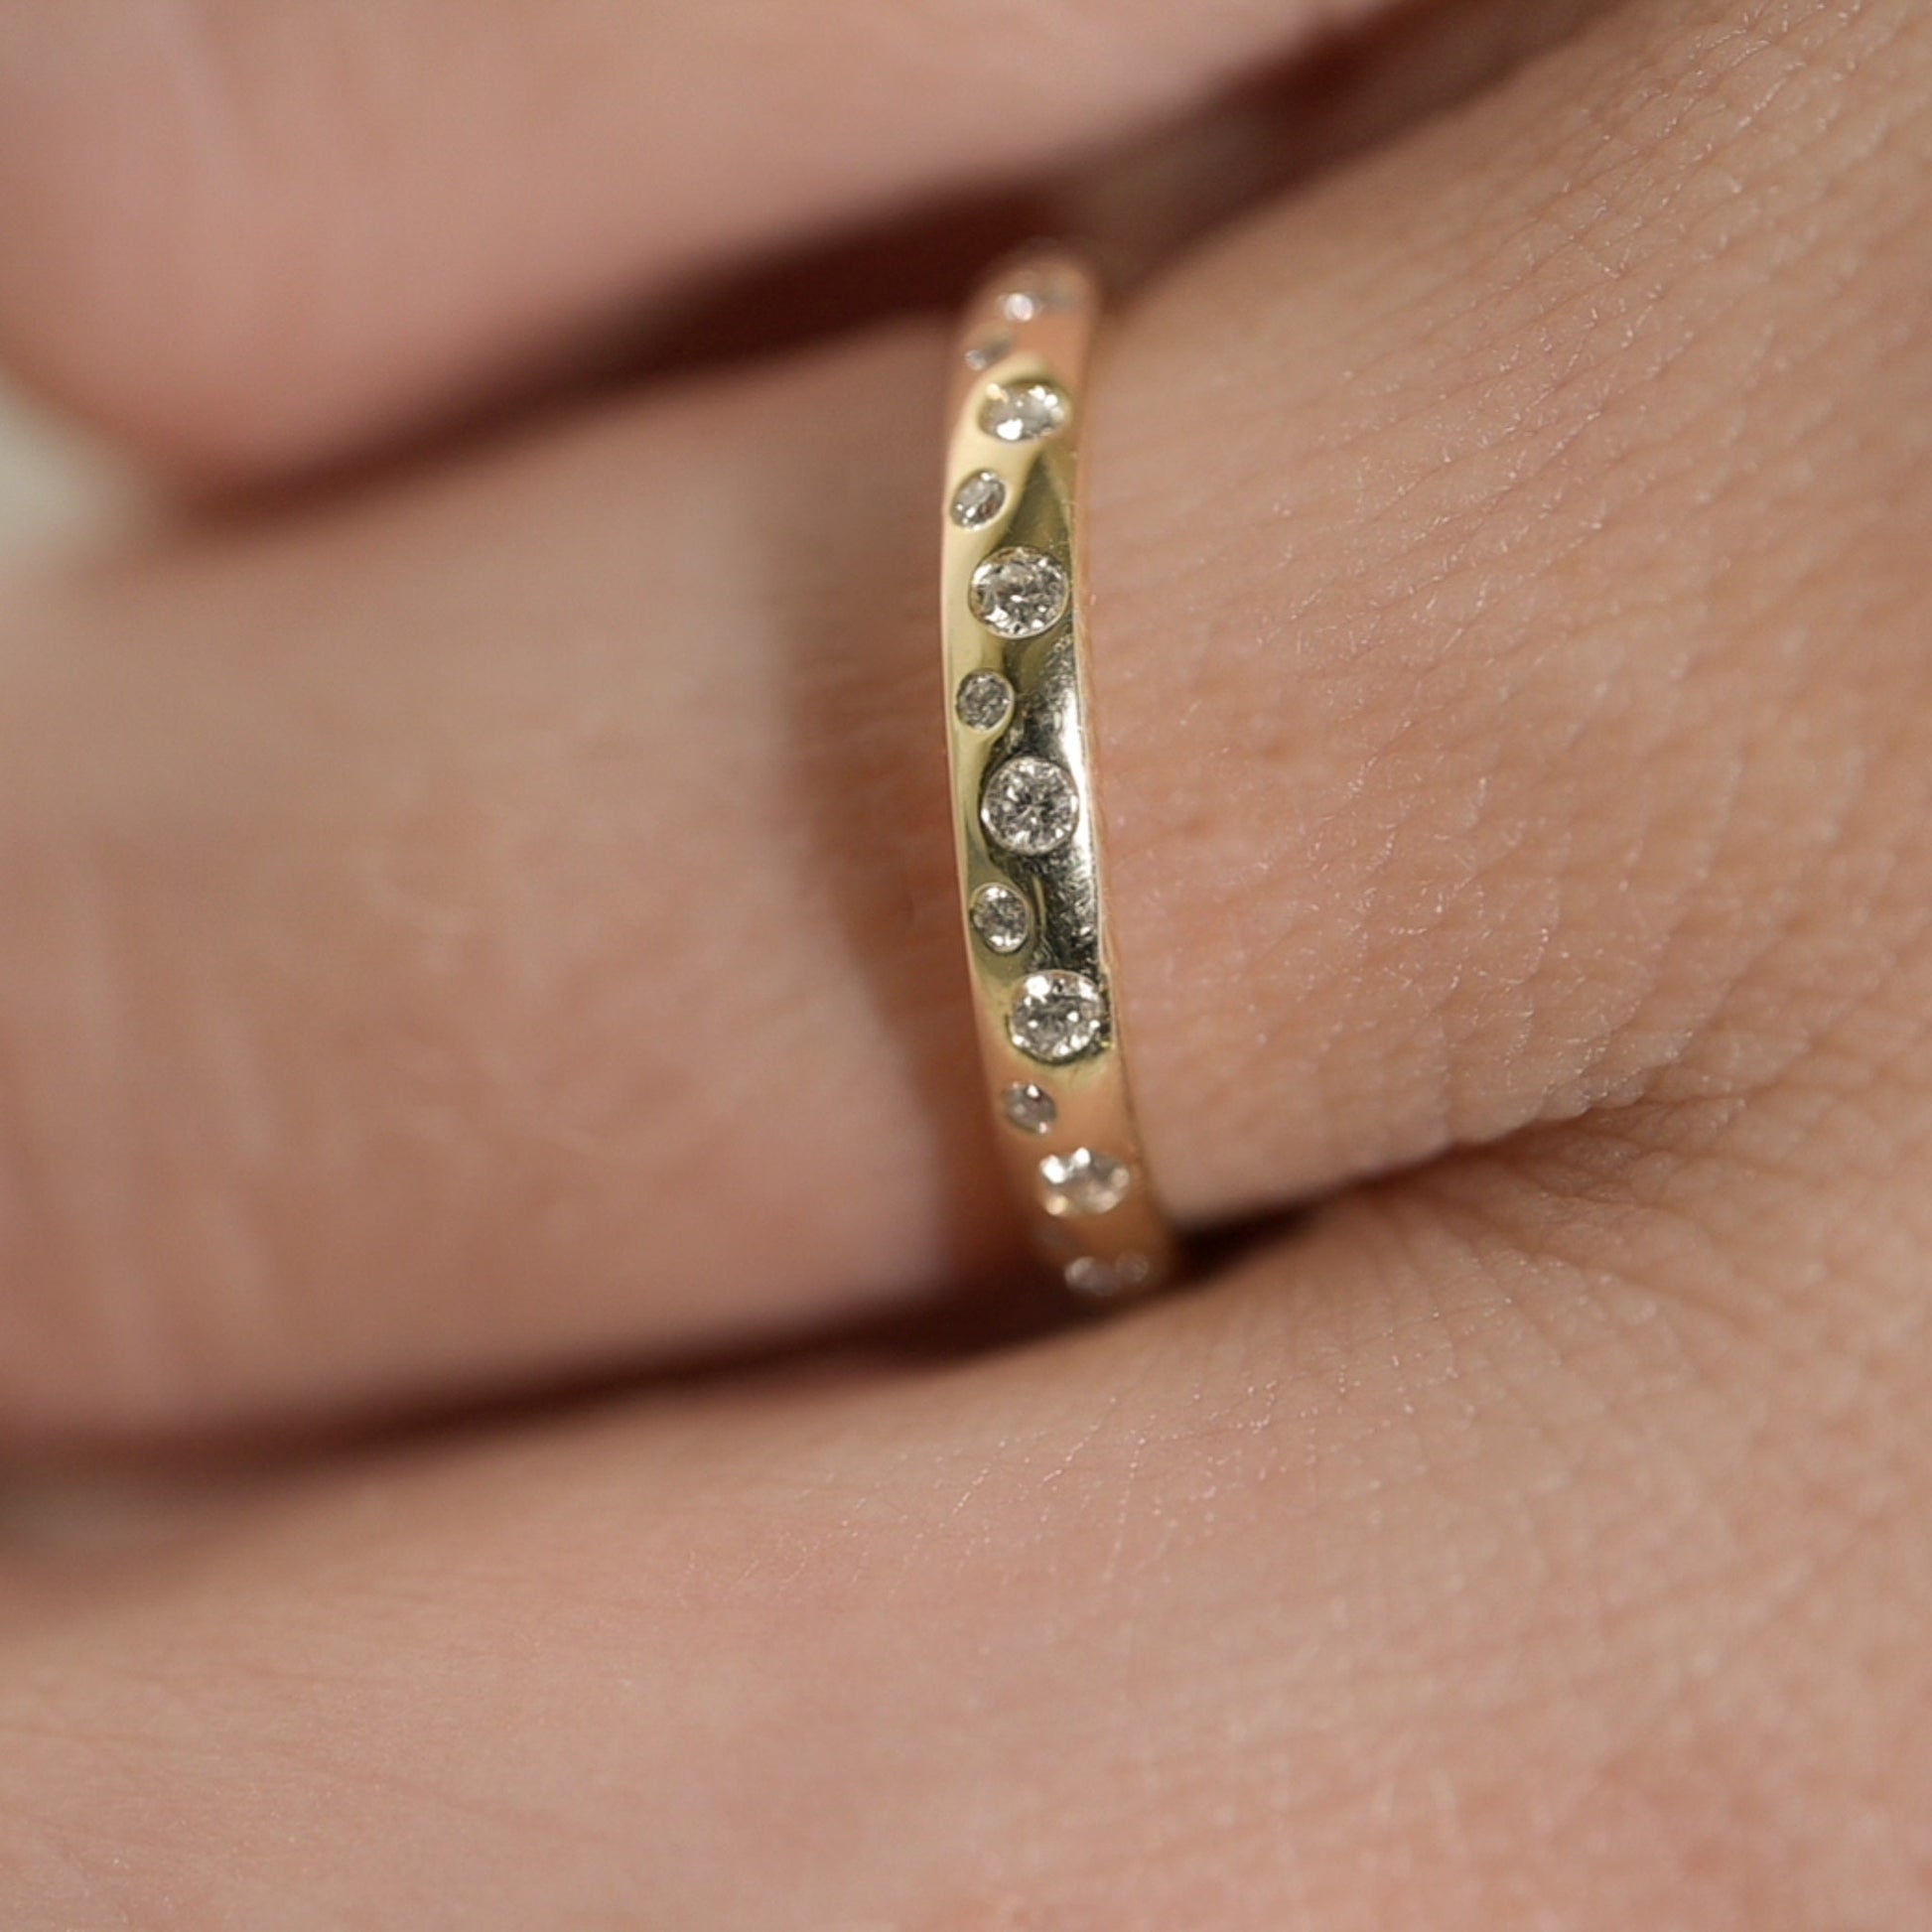 Diamond Gypsy Set Gold Band, Anniversary Band, or Wedding Band, inside engraving with personalized date